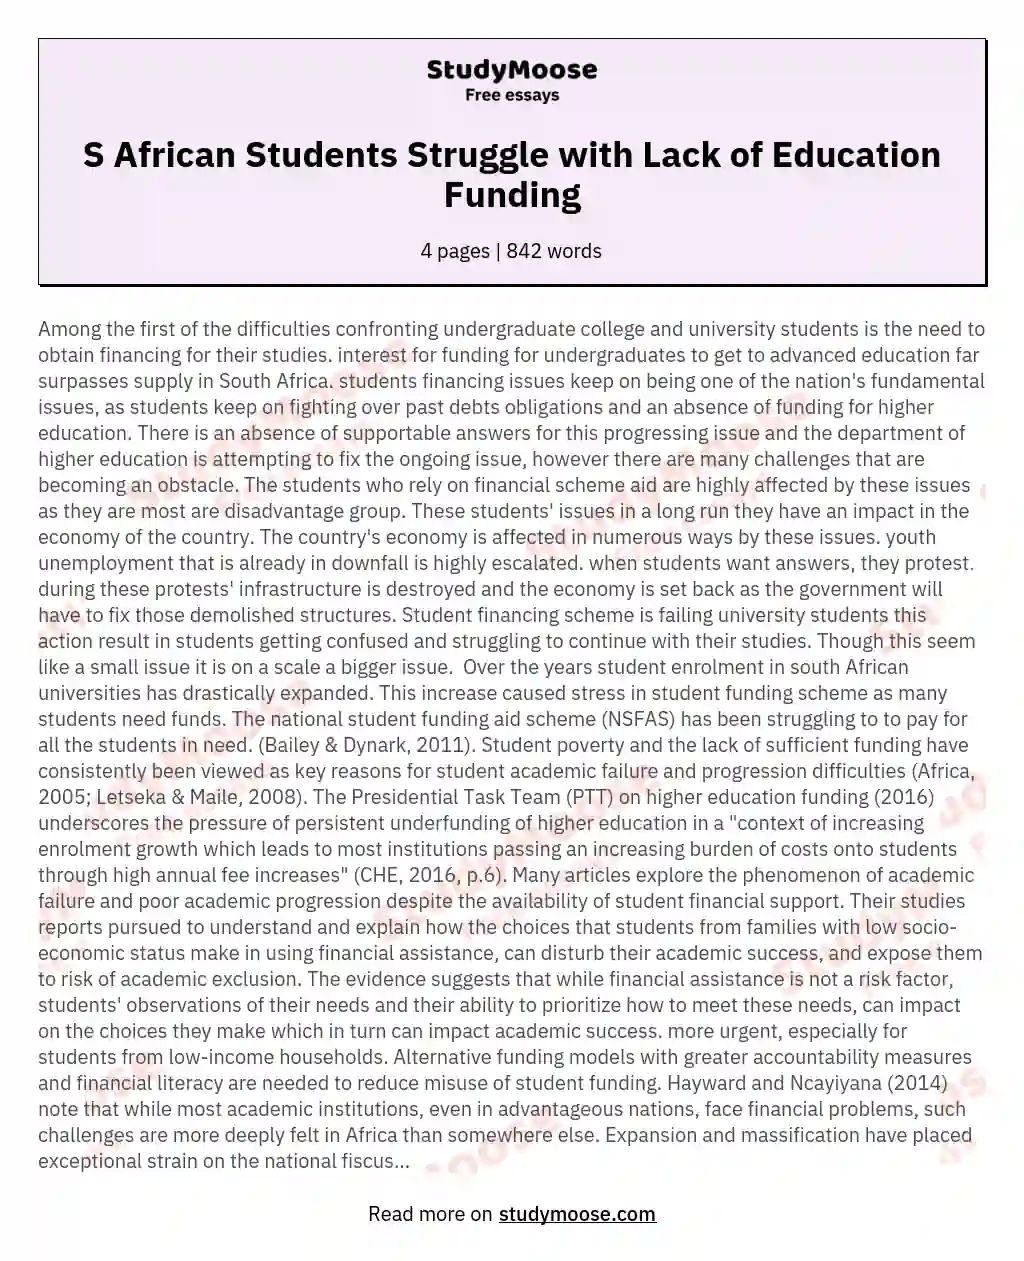 S African Students Struggle with Lack of Education Funding essay